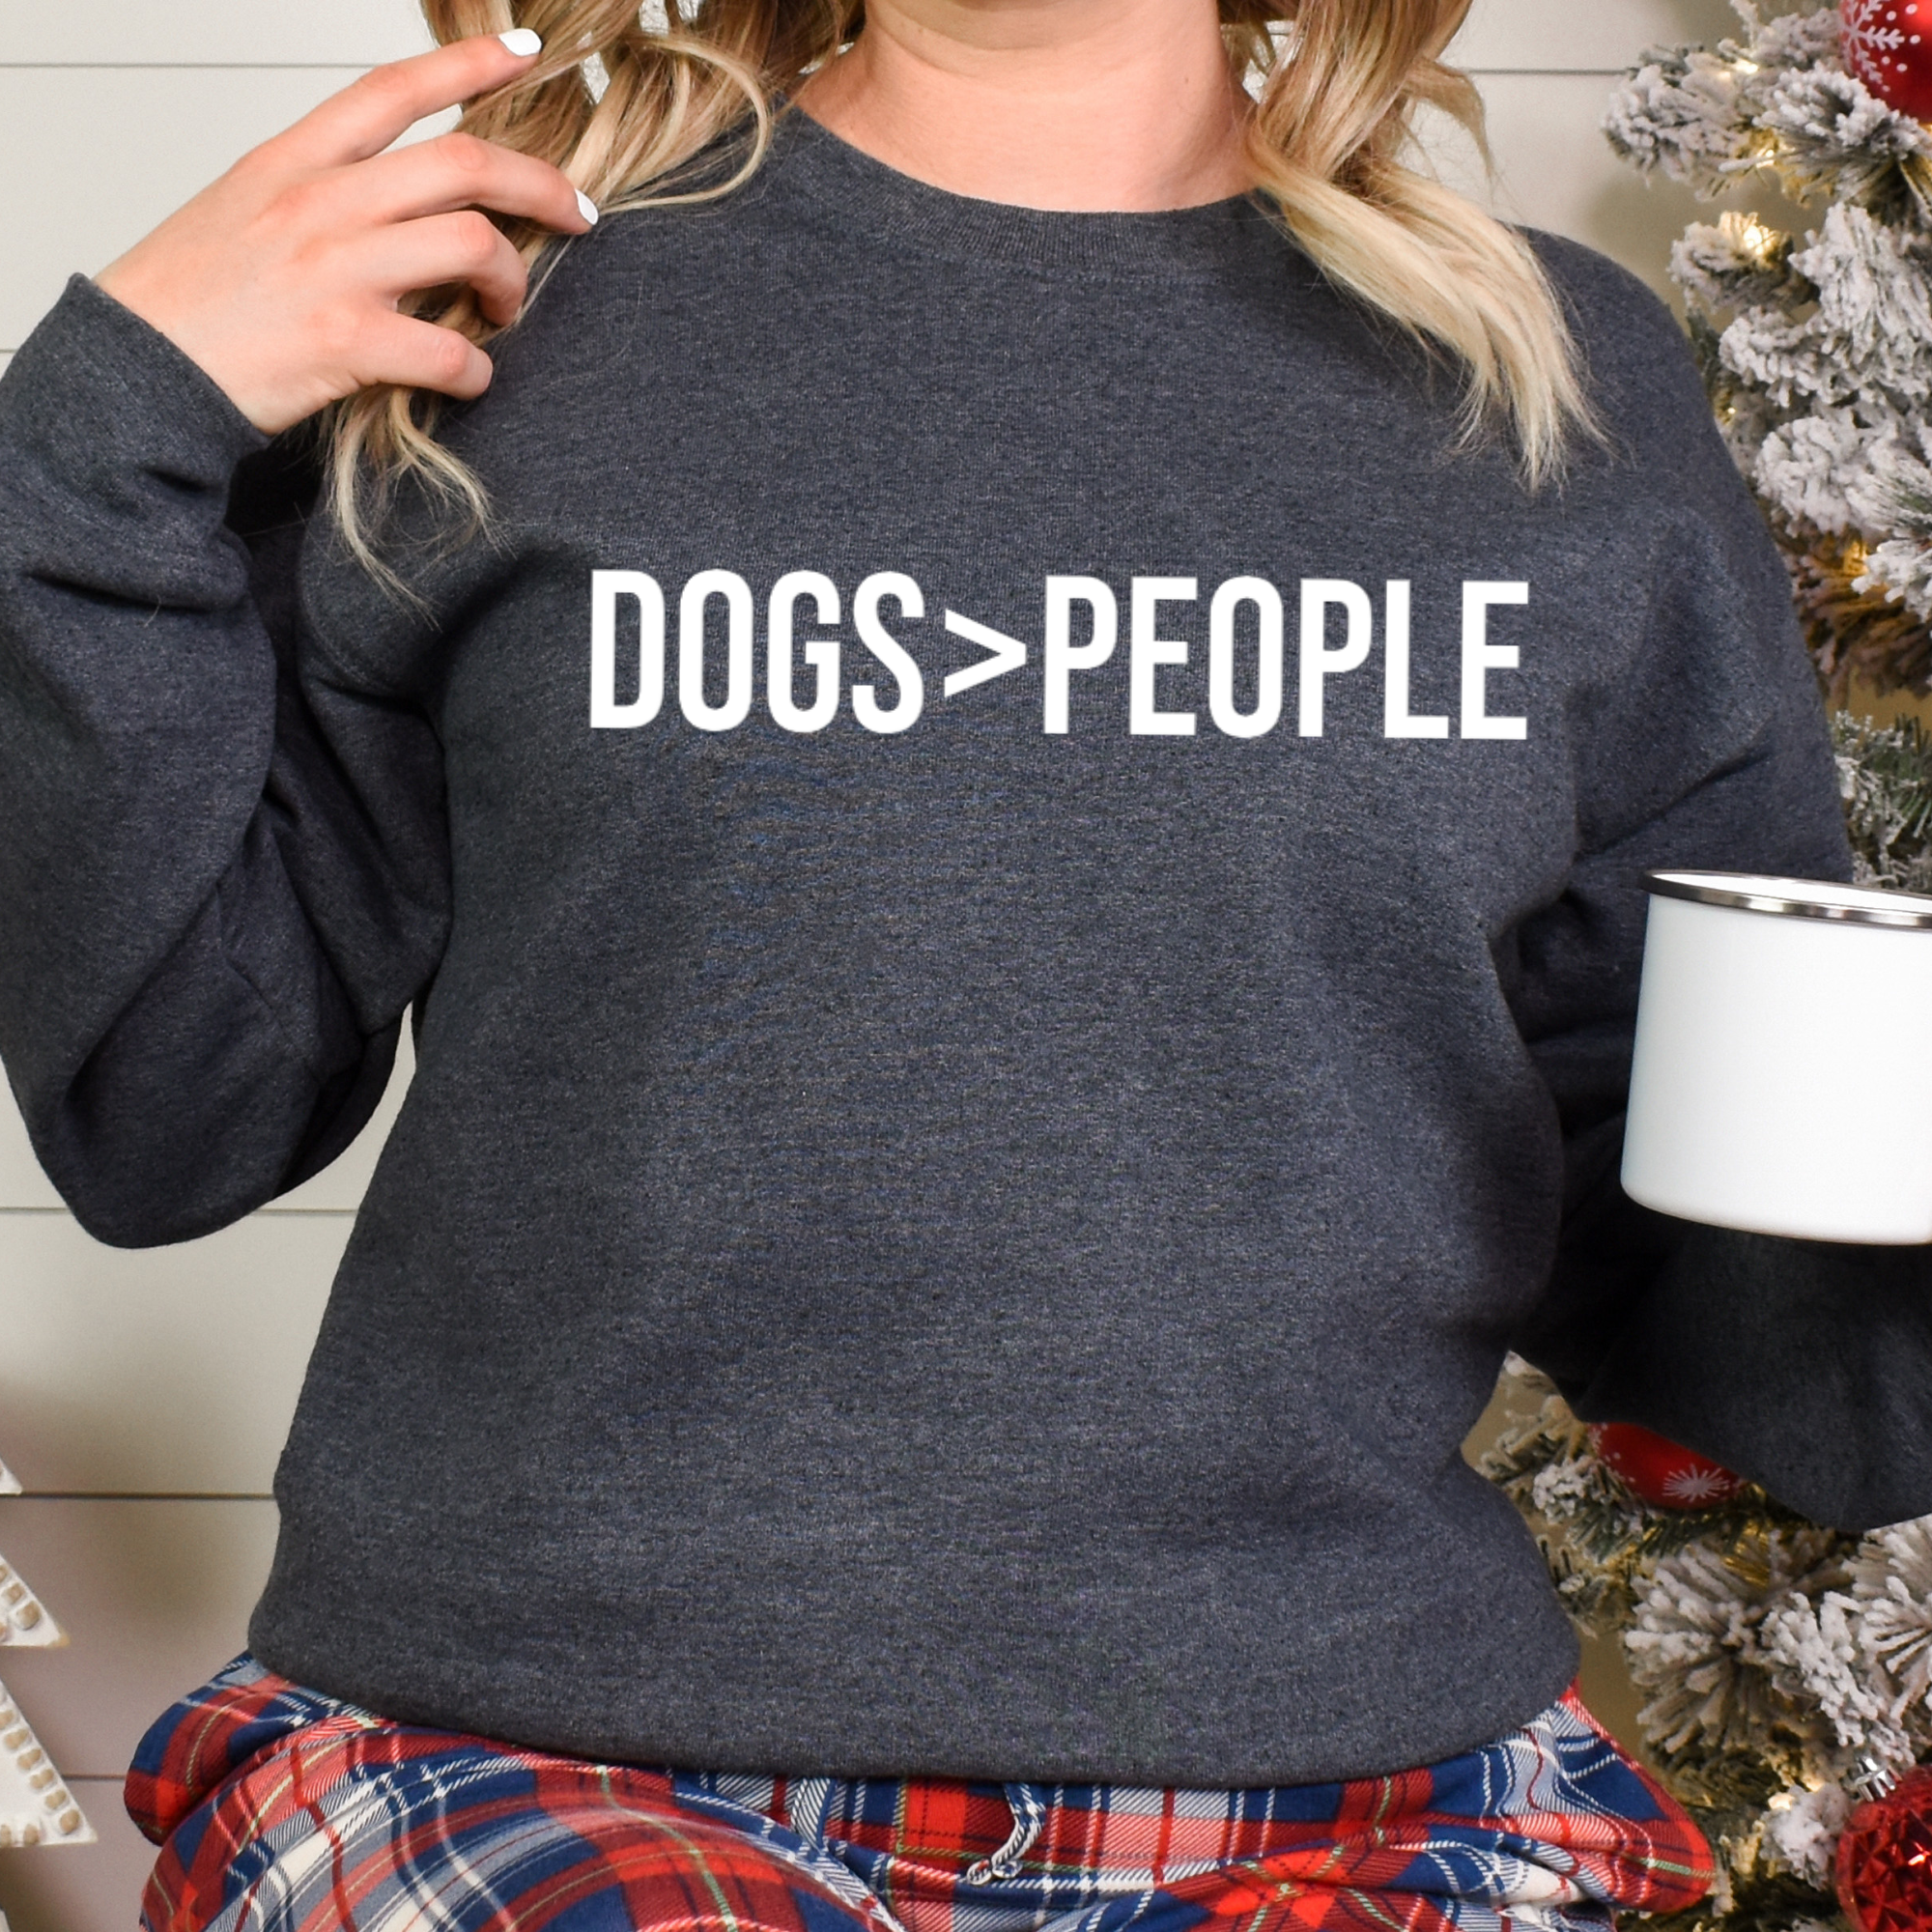 Dogs Are Greater Than People Shirt